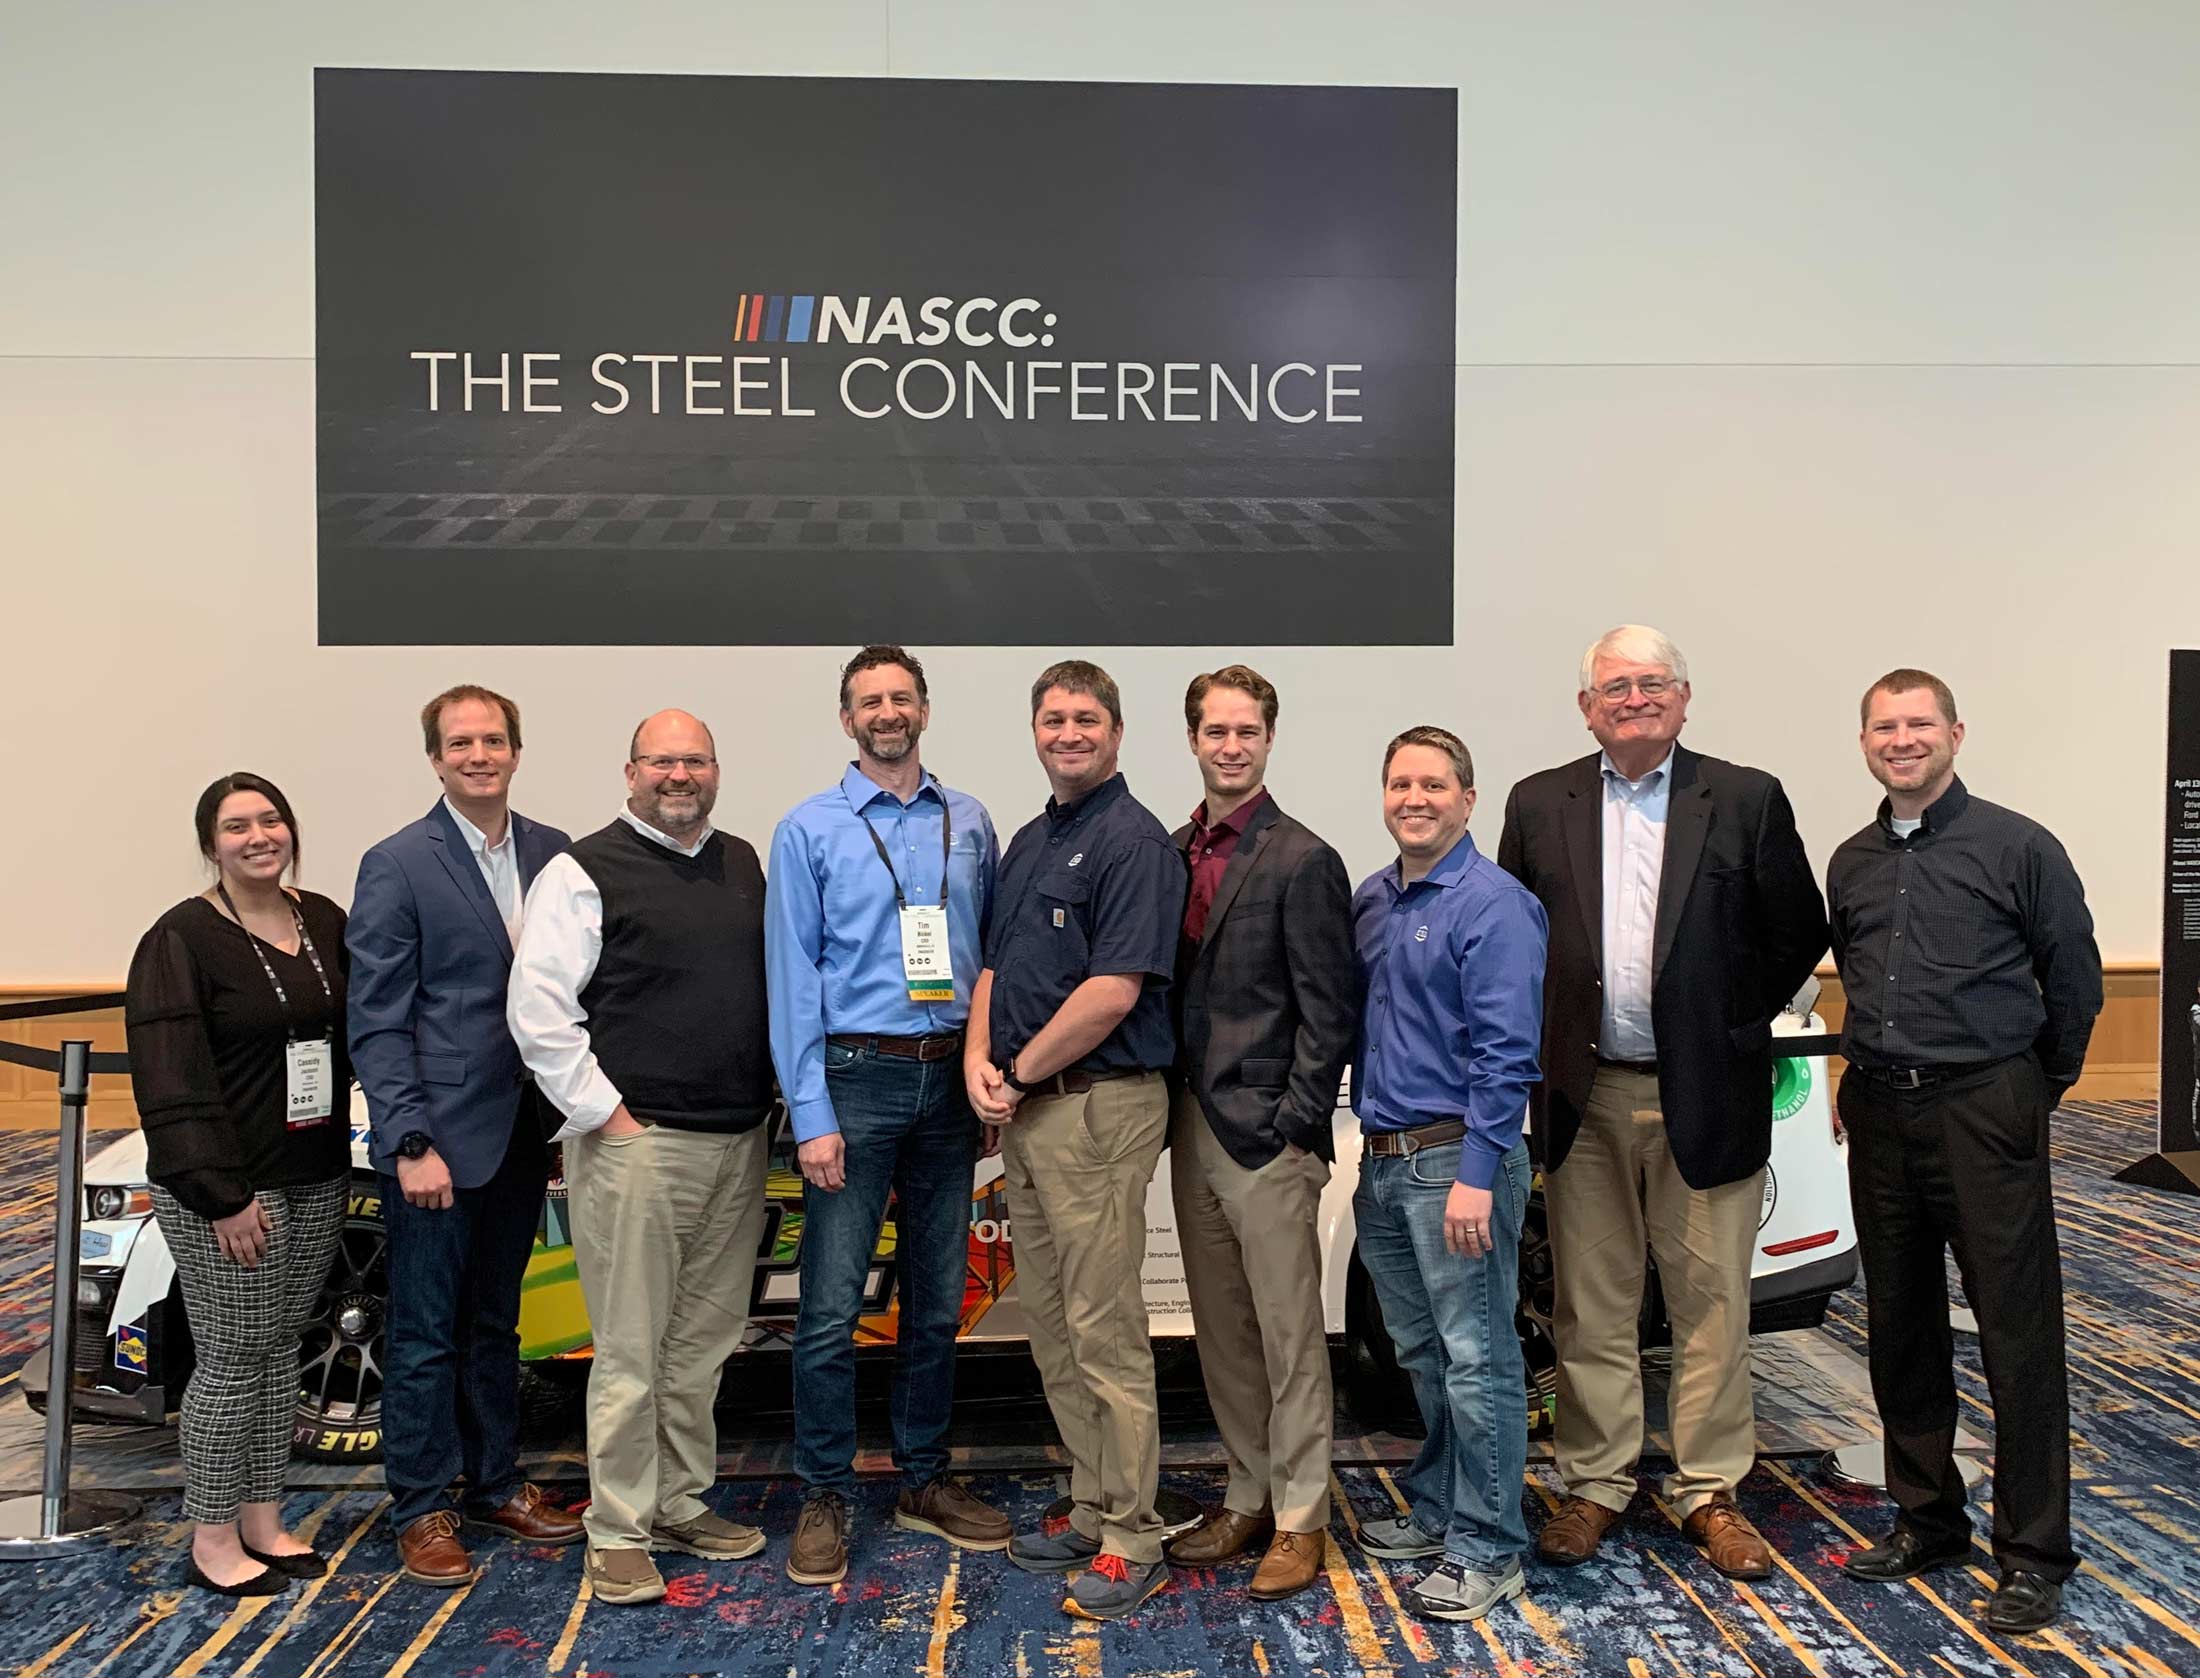 CSD Structural Engineering attends and presents at NASCC: The Steel Conference 2023